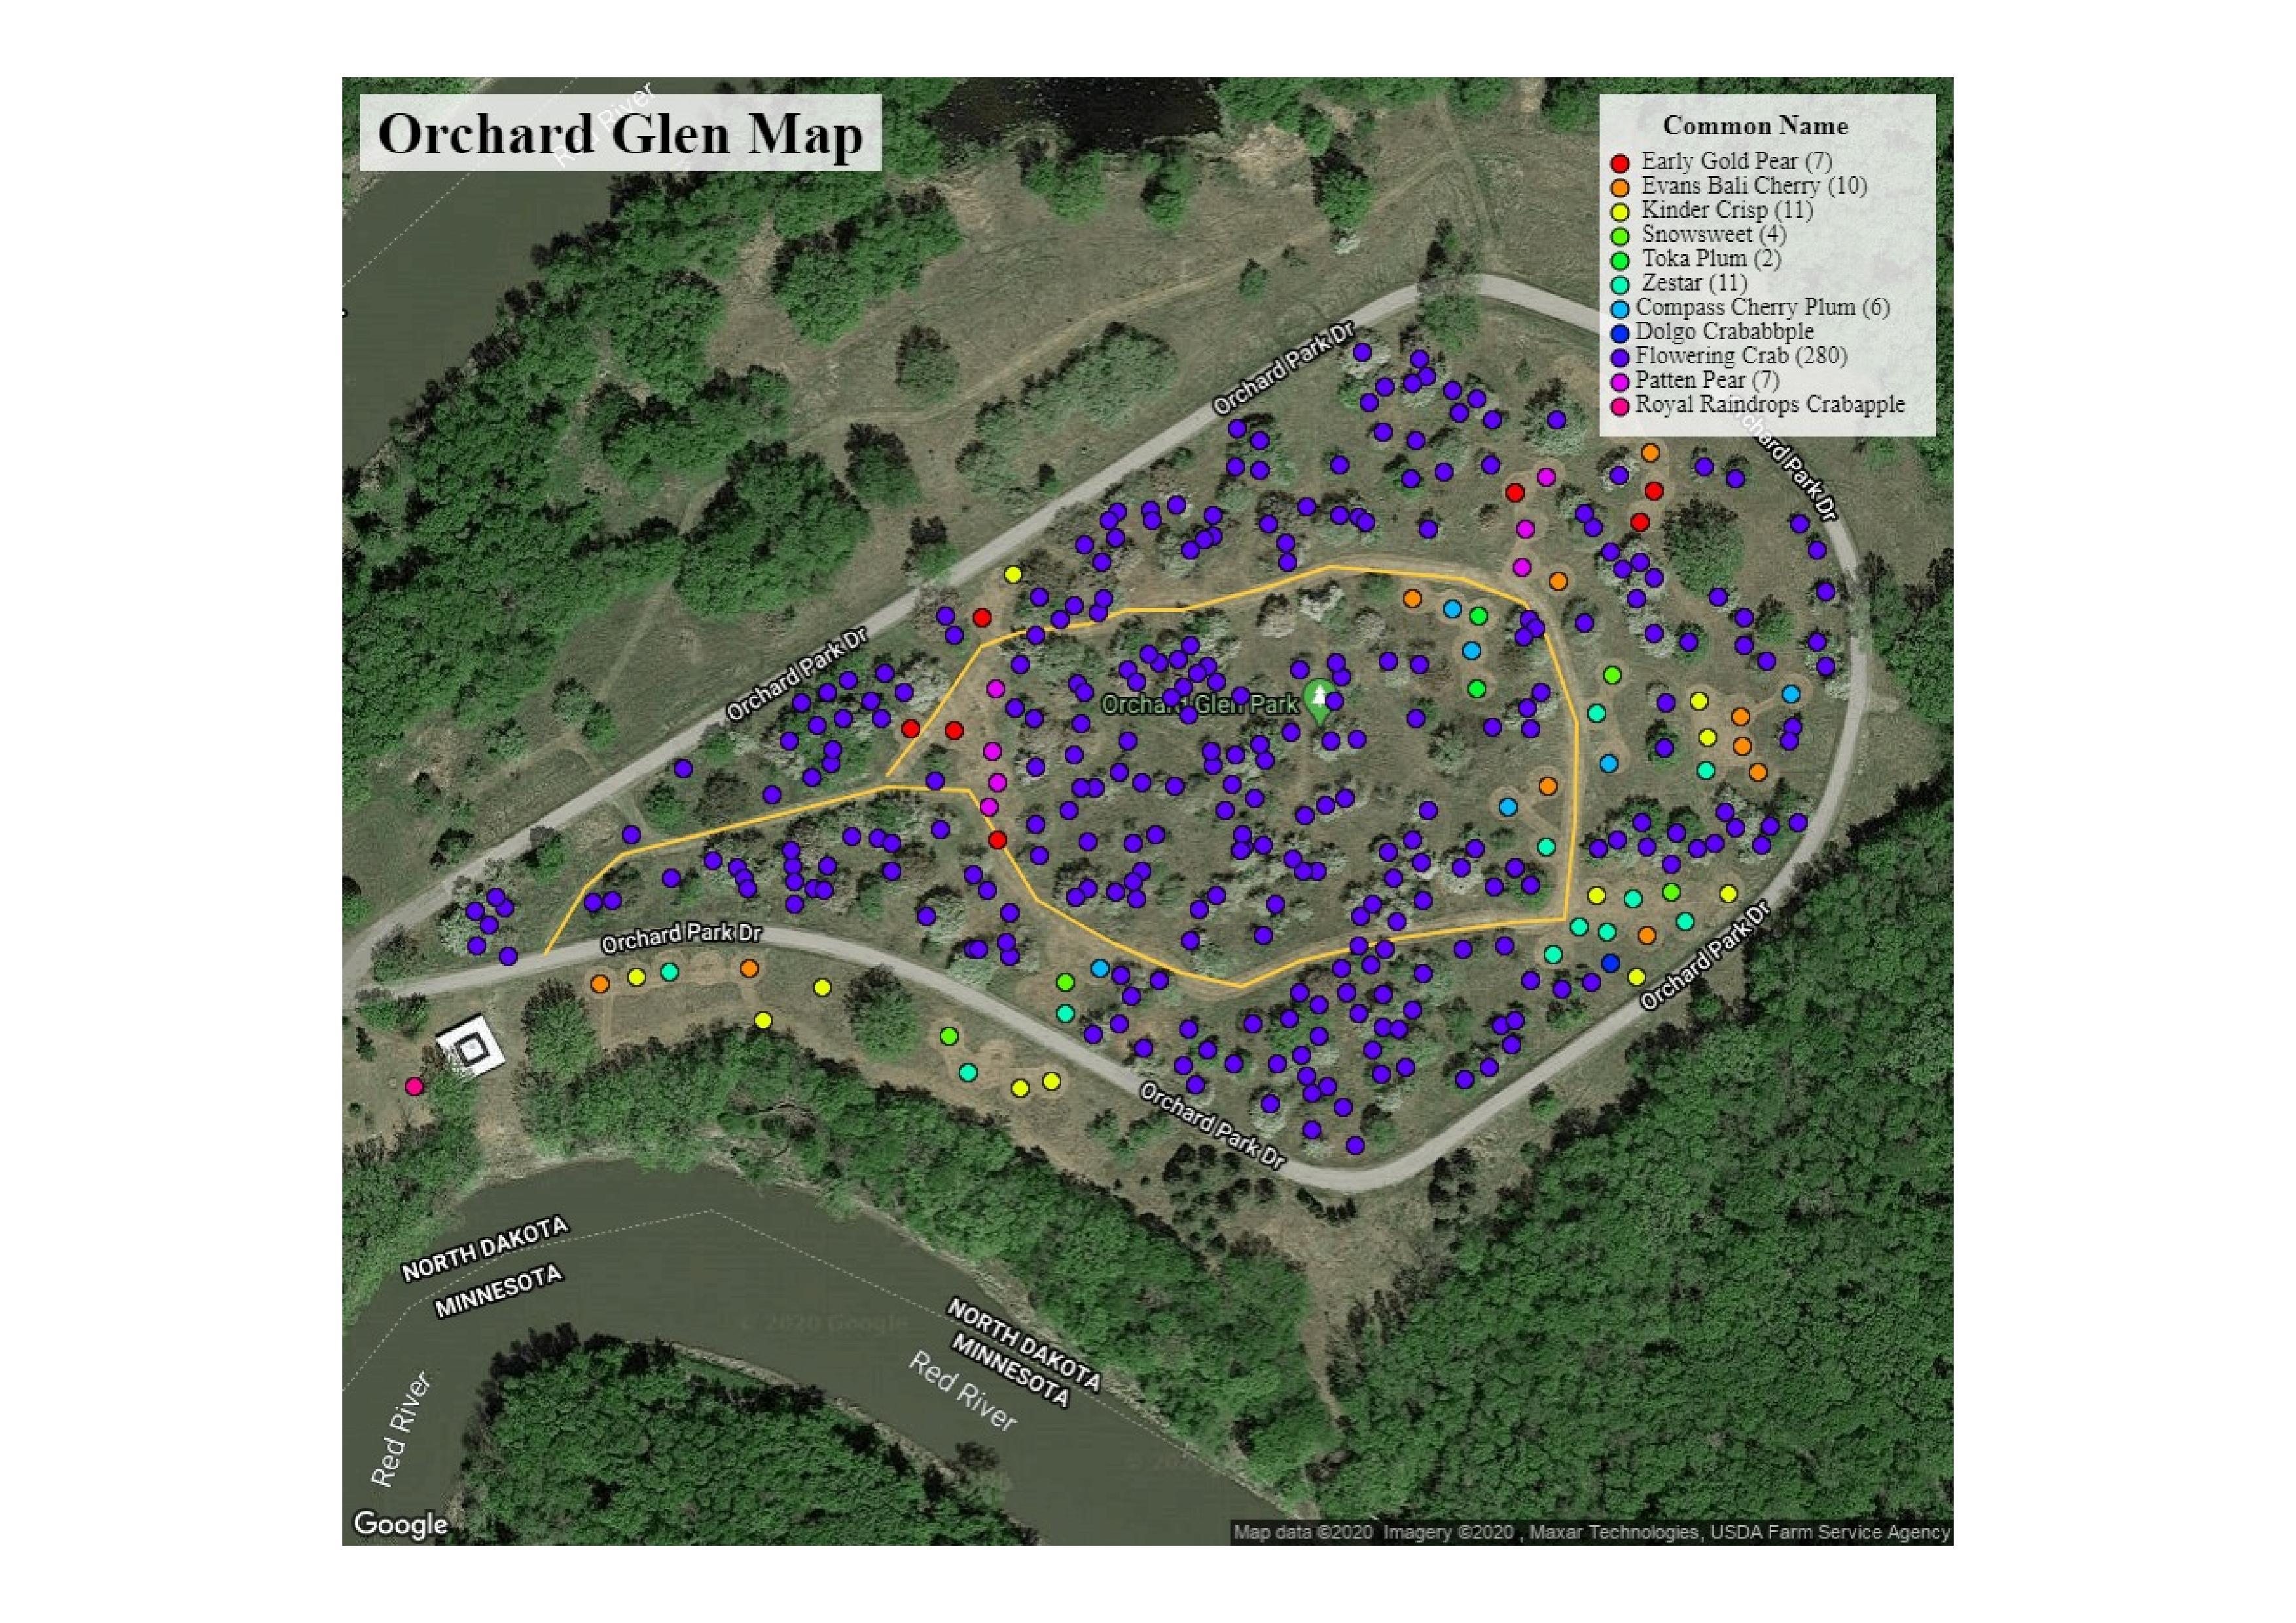 This image shows the Orchard Glen Park map and tree variety's. 